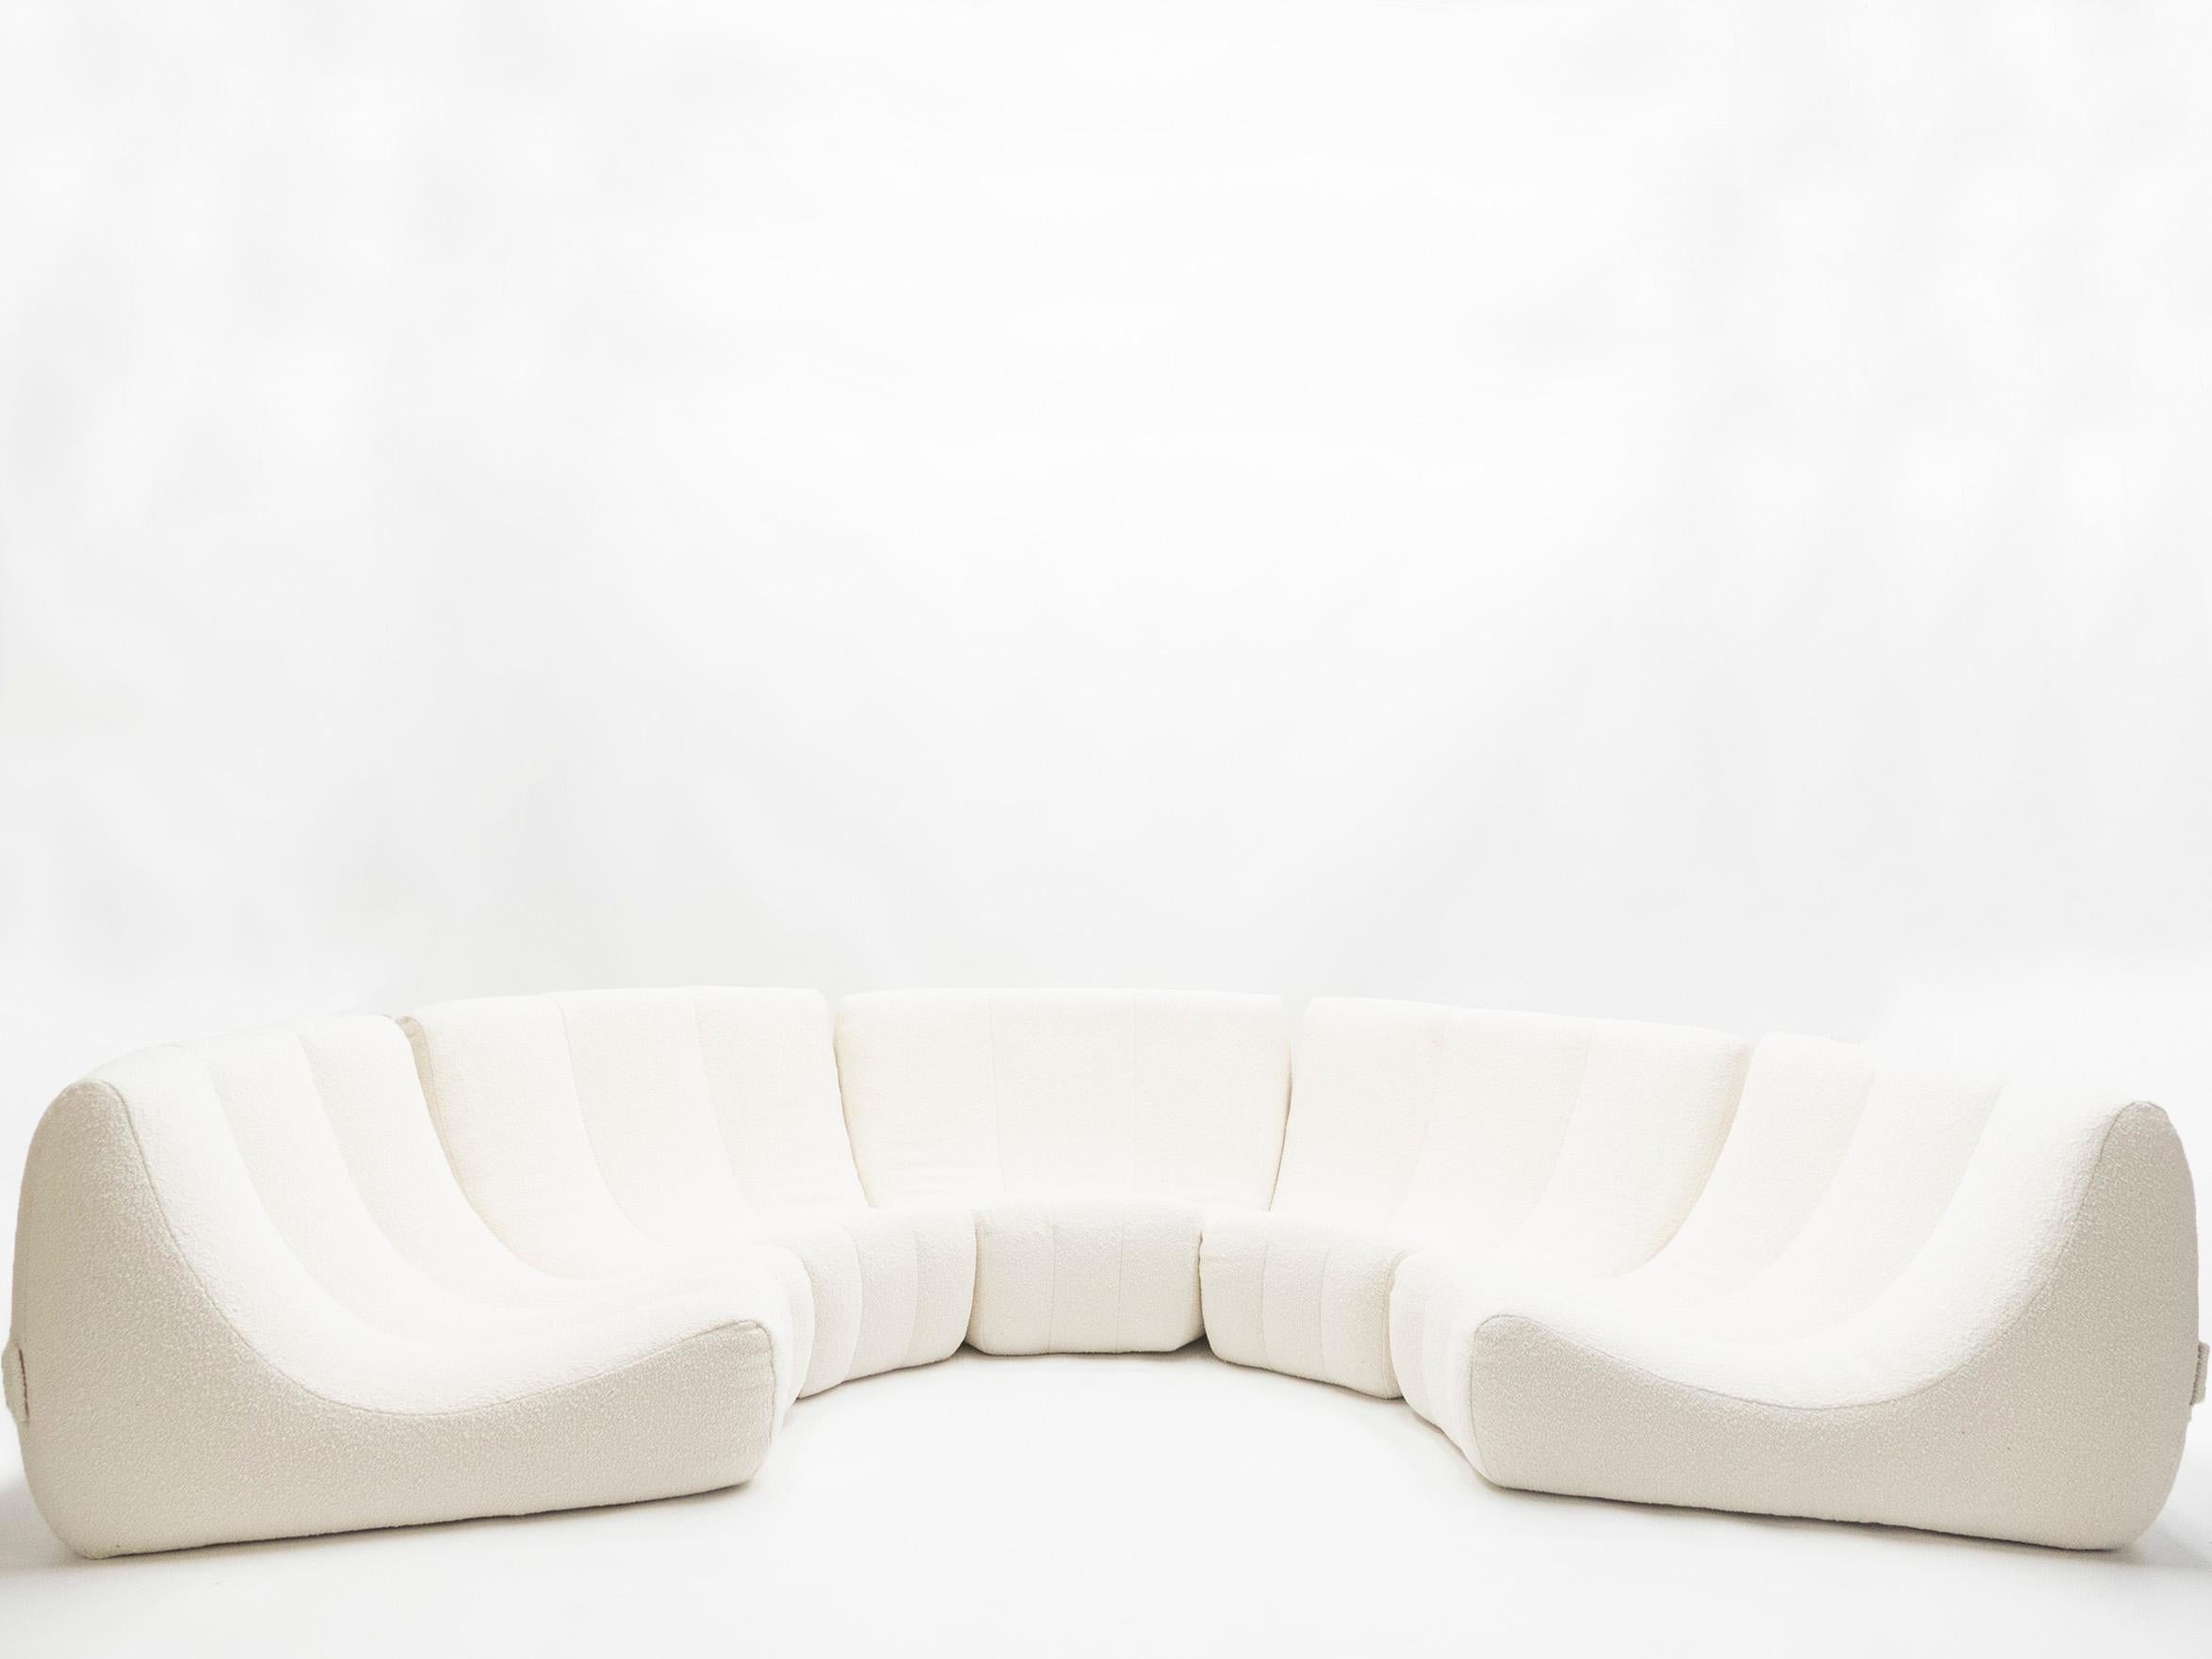 Very rare and unique extra large Gilda circle sofa by Michel Ducaroy made by Ligne Roset in 1972. The sofa consists of five elements connected with metal buckles to hold them in place, forming a little bit more than half a circle. The five elements